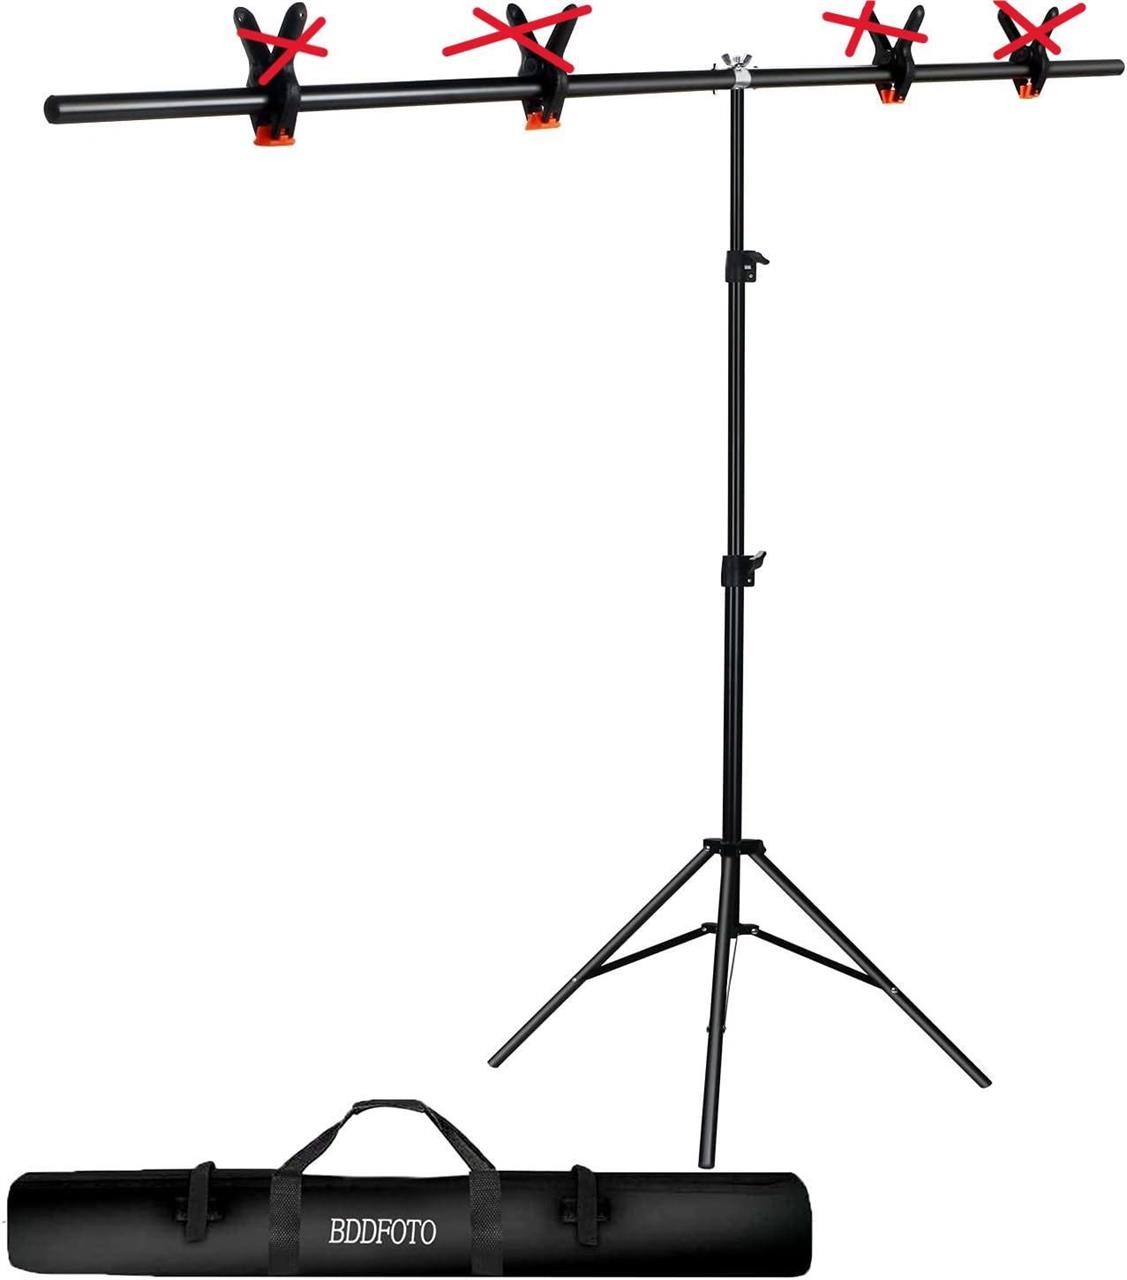 USED-BDDFOTO T-Shape Backdrop Stand 1.5x2m